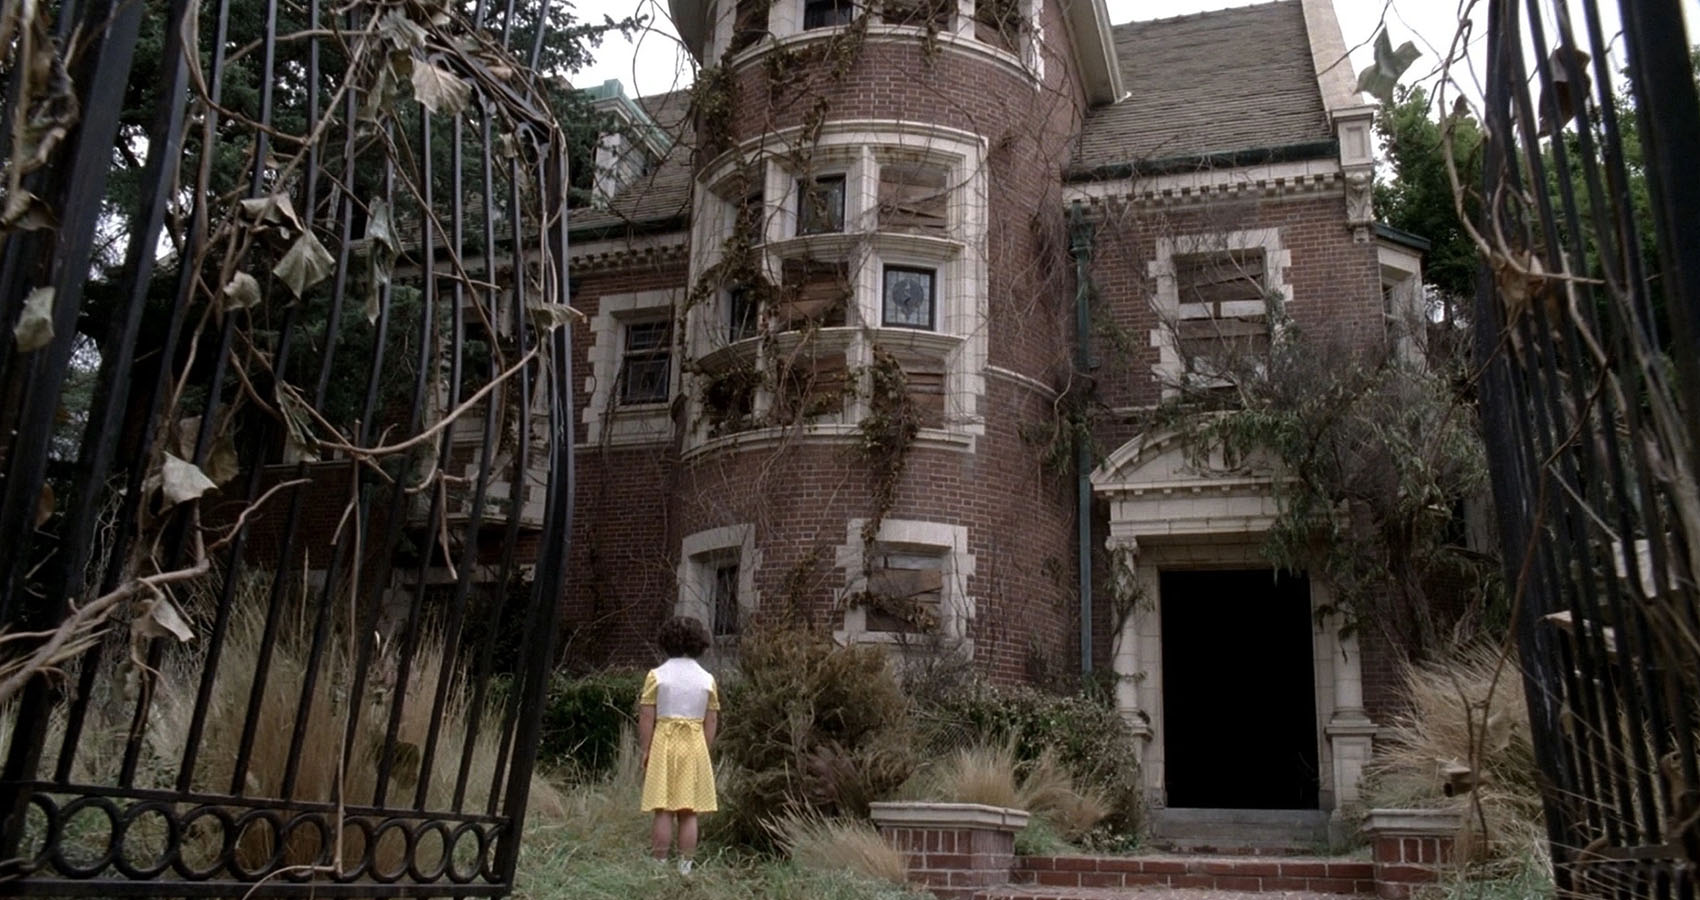 urban legends that turned out to be true - american horror story murder house location - D